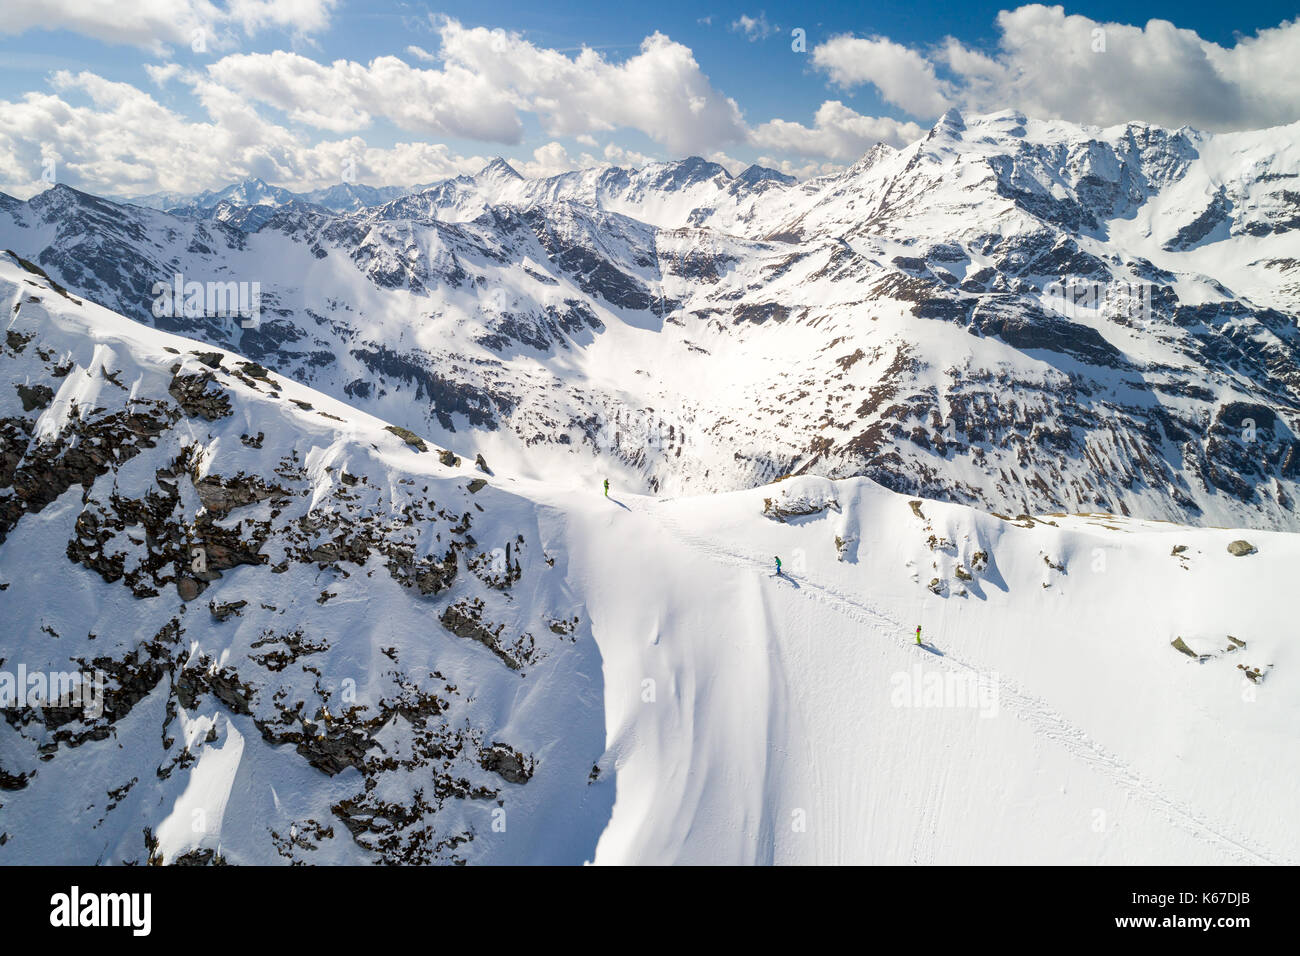 Aerial image of a group of 3 people ski touring Stock Photo